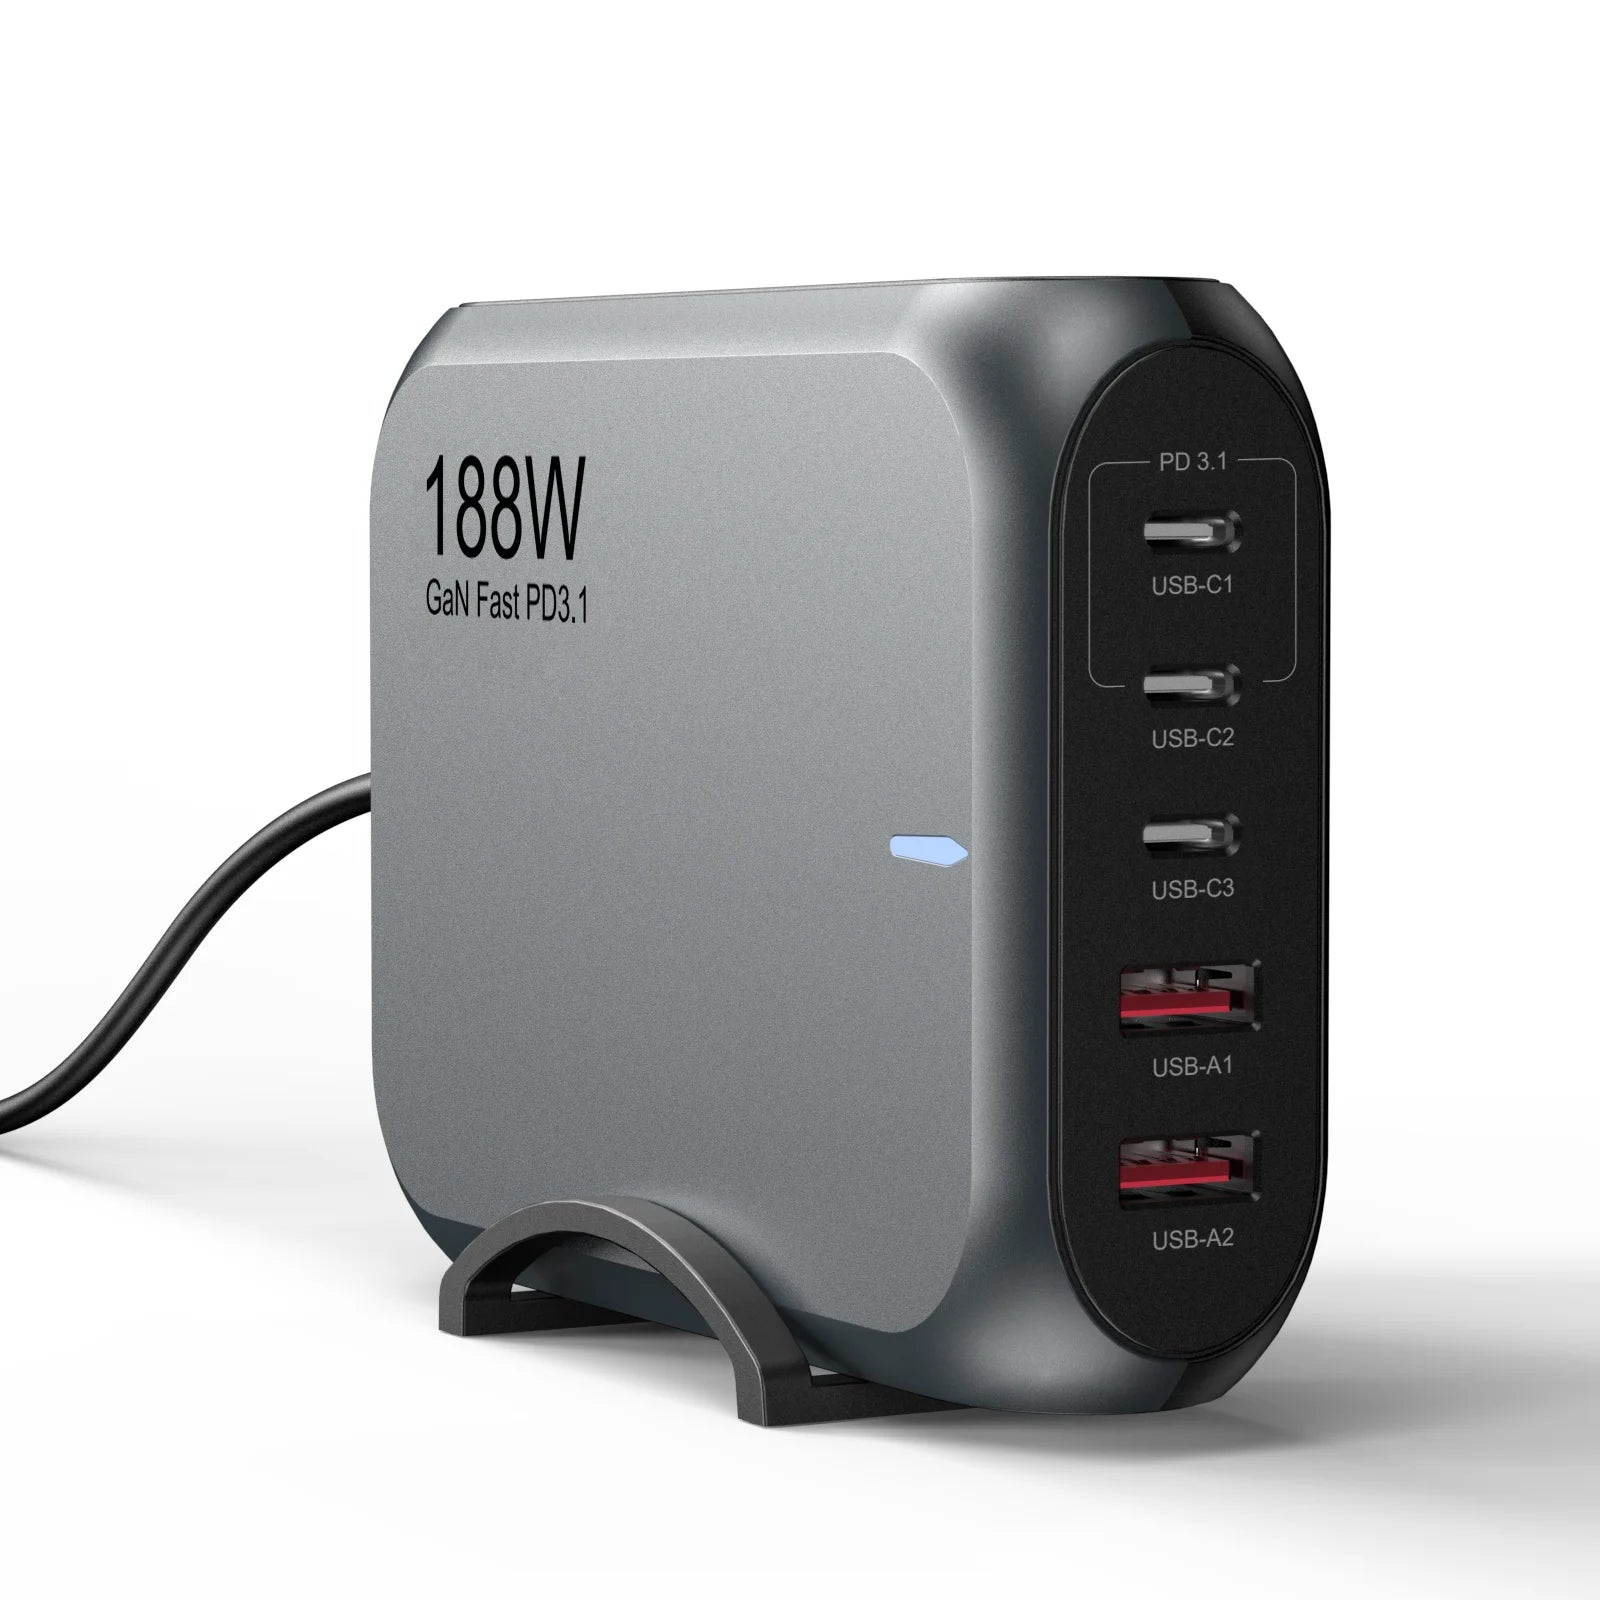 5 Ports 188W GaN  Fast Charger Station